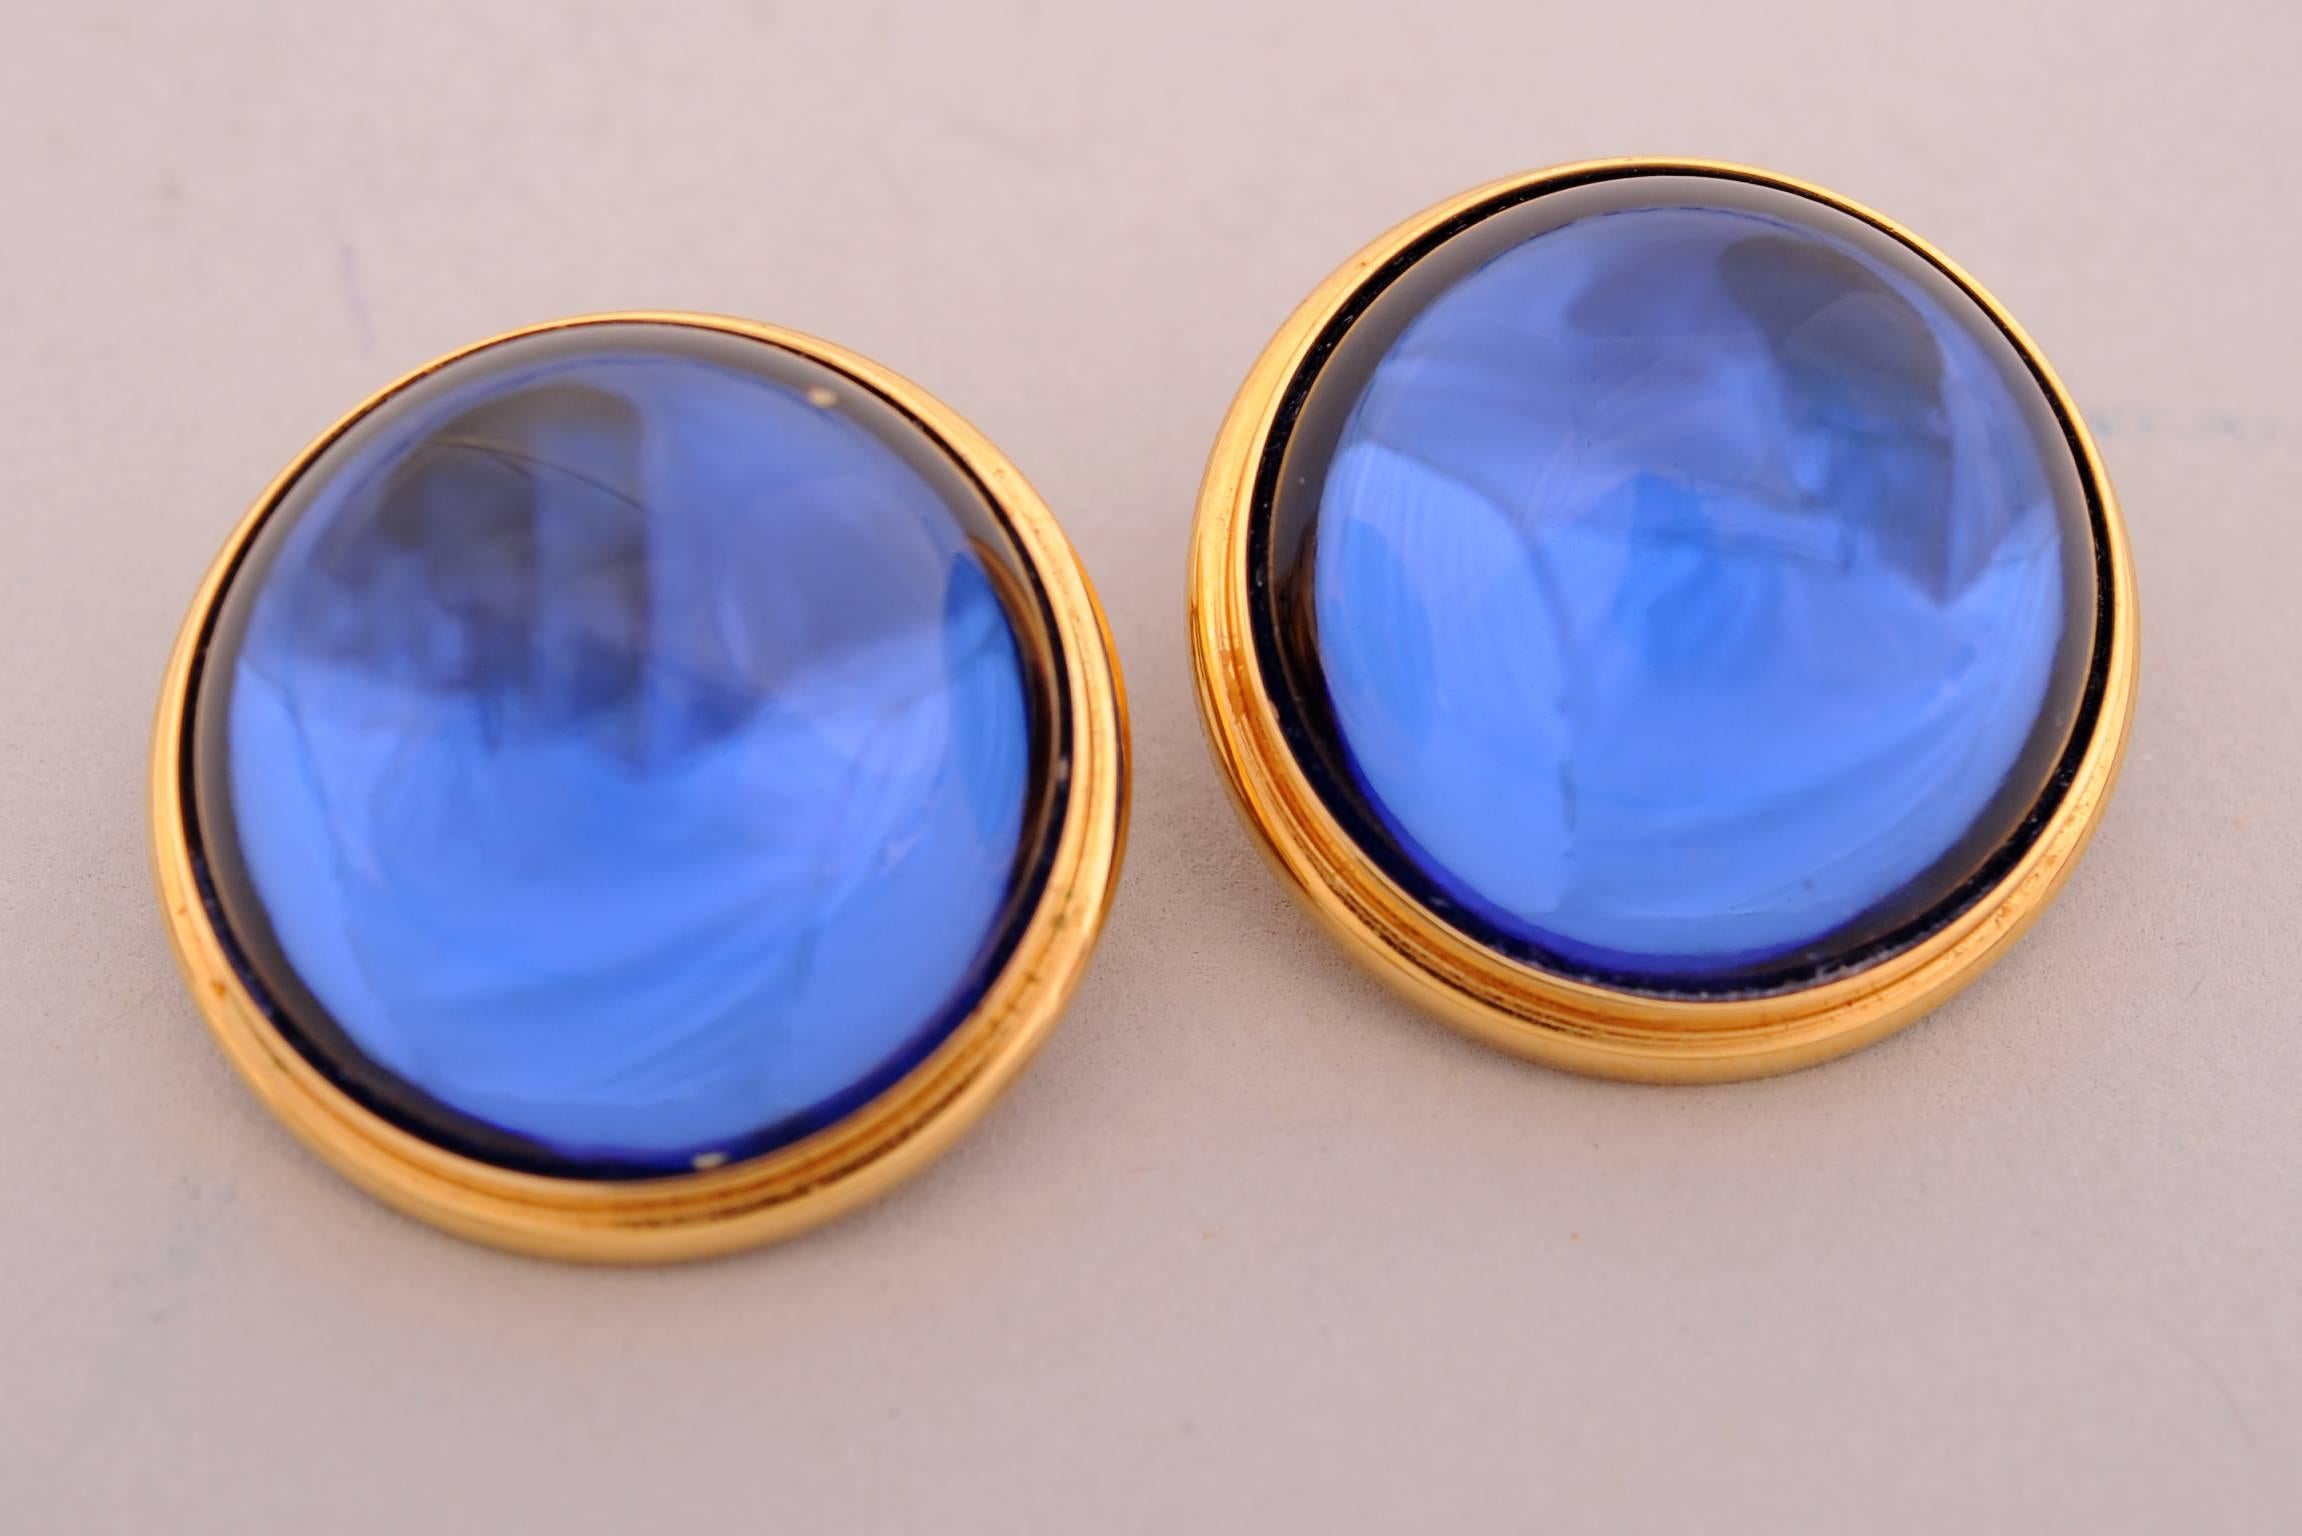 Lalique  blue crystal cabochons are ringed with a raised gold toned band. The earrings are clip backs and are marked Lalique, France on the back. They are in excellent condition.
Measurements;
Height 1/2